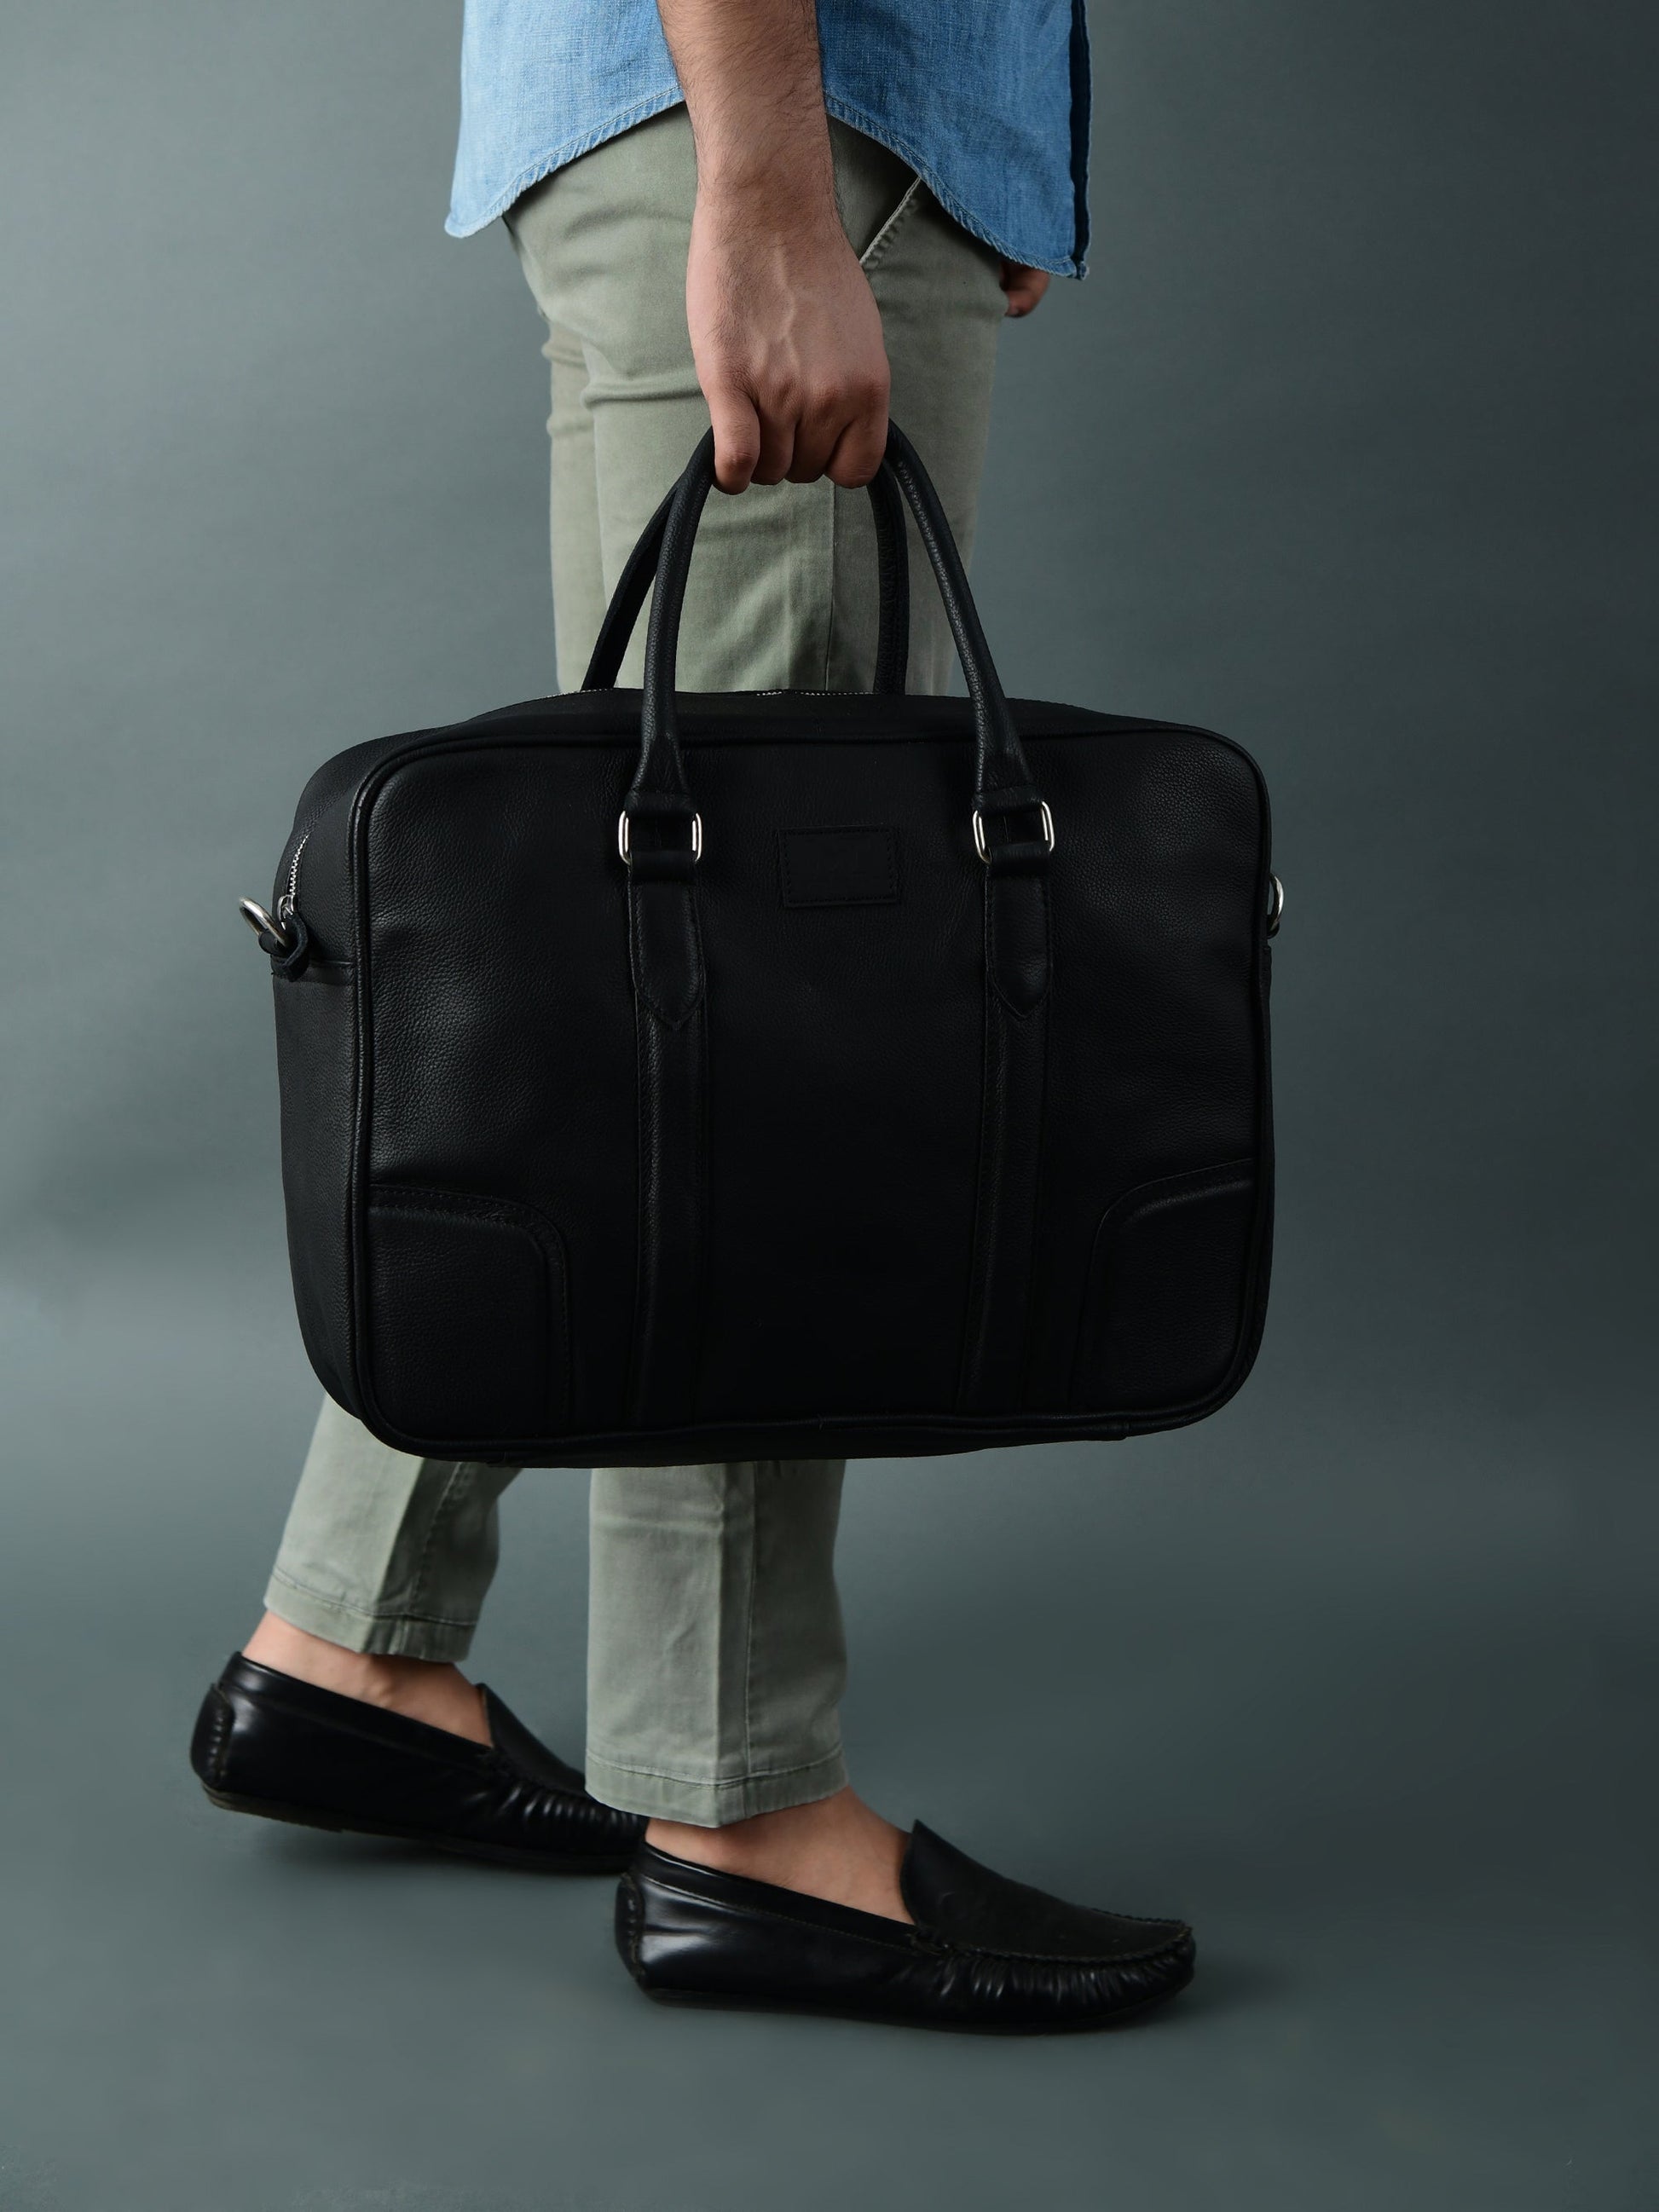 Texas Black Leather Briefcase - The Tool Store